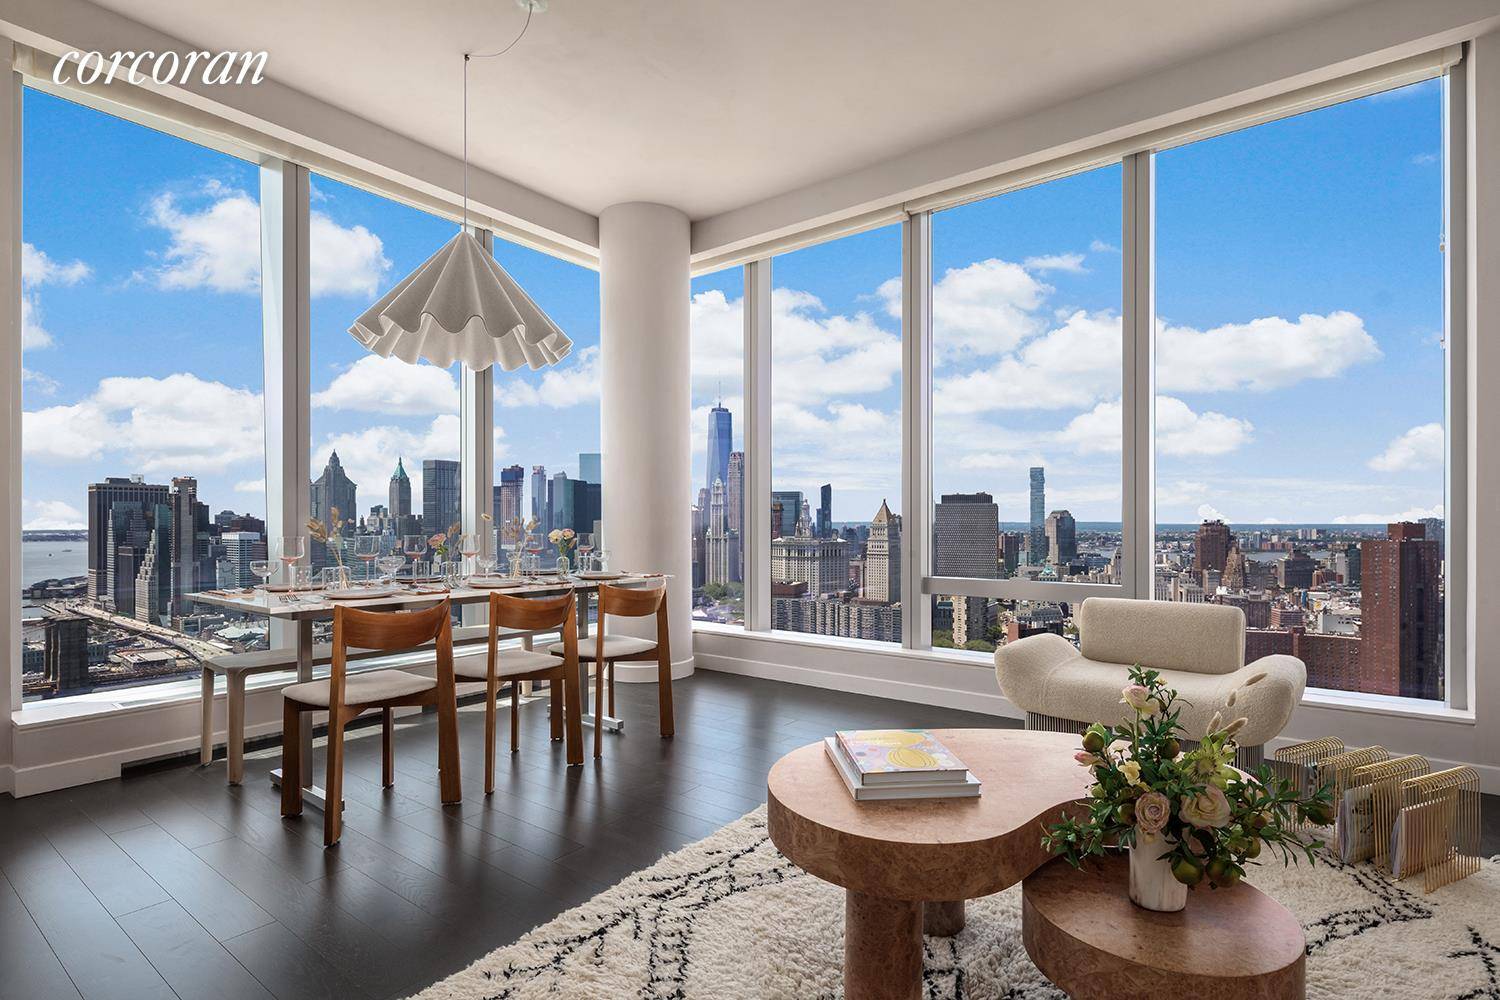 ONE MANHATTAN SQUARE OFFERS ONE OF THE LAST 20 YEAR TAX ABATEMENTS AVAILABLE IN NEW YORK CITY Residence 11L is a 1, 123 square foot two bedroom, two bathroom with ...